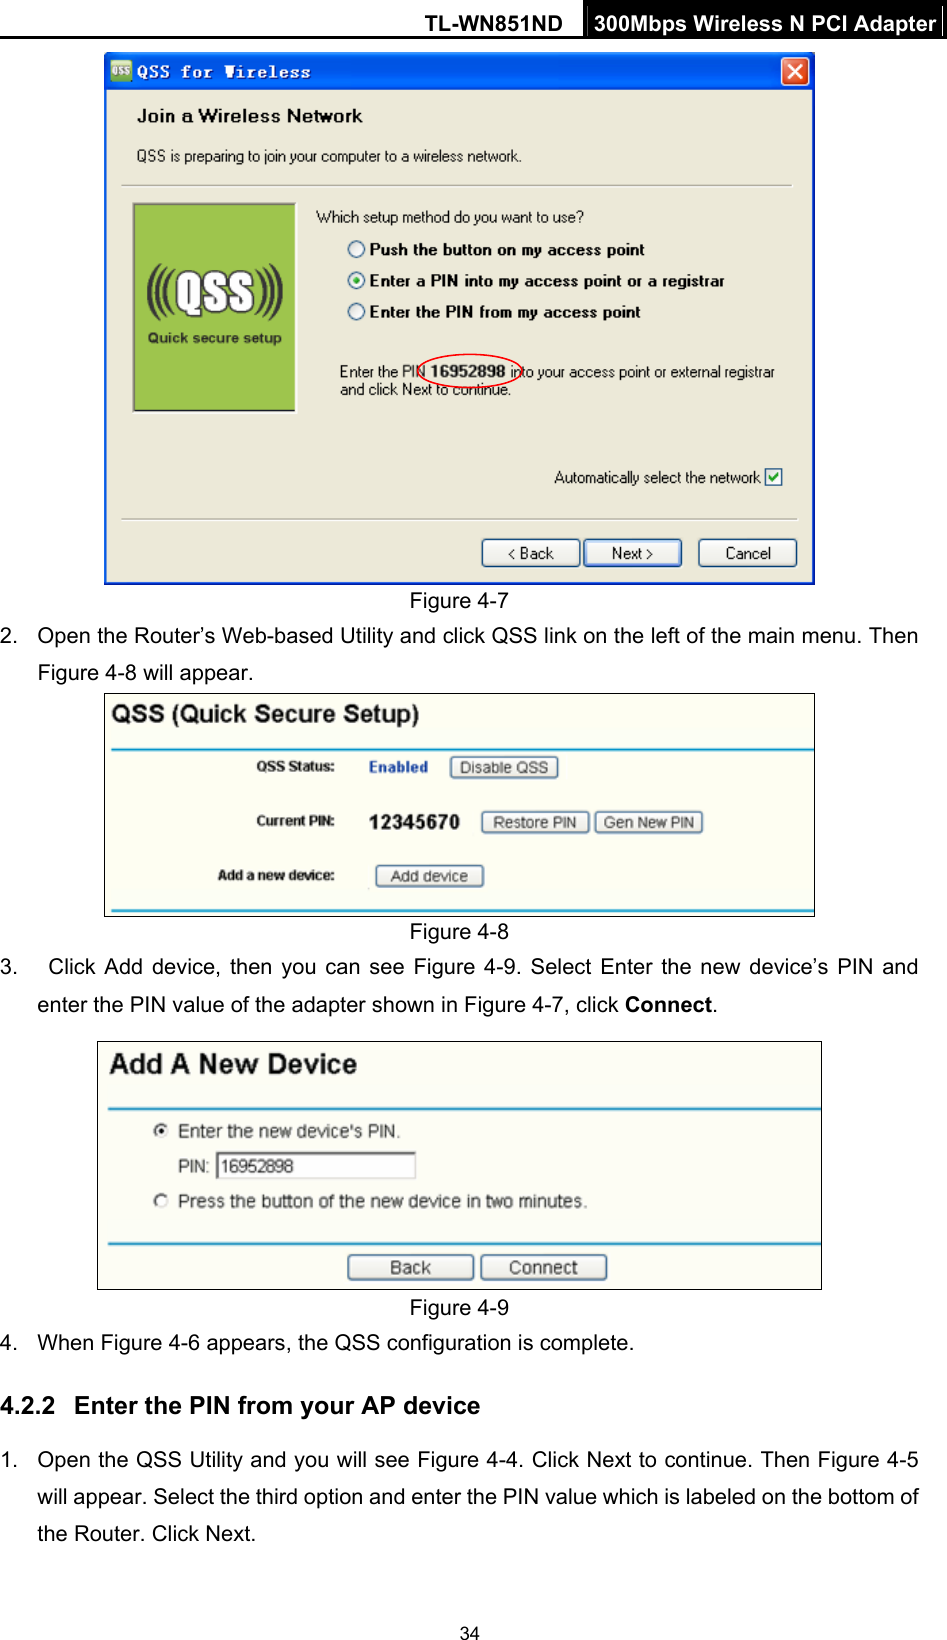 TL-WN851ND  300Mbps Wireless N PCI Adapter  34 Figure 4-7 2.  Open the Router’s Web-based Utility and click QSS link on the left of the main menu. Then Figure 4-8 will appear.  Figure 4-8 3.   Click Add device, then you can see Figure 4-9. Select Enter the new device’s PIN and enter the PIN value of the adapter shown in Figure 4-7, click Connect.   Figure 4-9 4. When Figure 4-6 appears, the QSS configuration is complete. 4.2.2  Enter the PIN from your AP device 1.  Open the QSS Utility and you will see Figure 4-4. Click Next to continue. Then Figure 4-5 will appear. Select the third option and enter the PIN value which is labeled on the bottom of the Router. Click Next. 